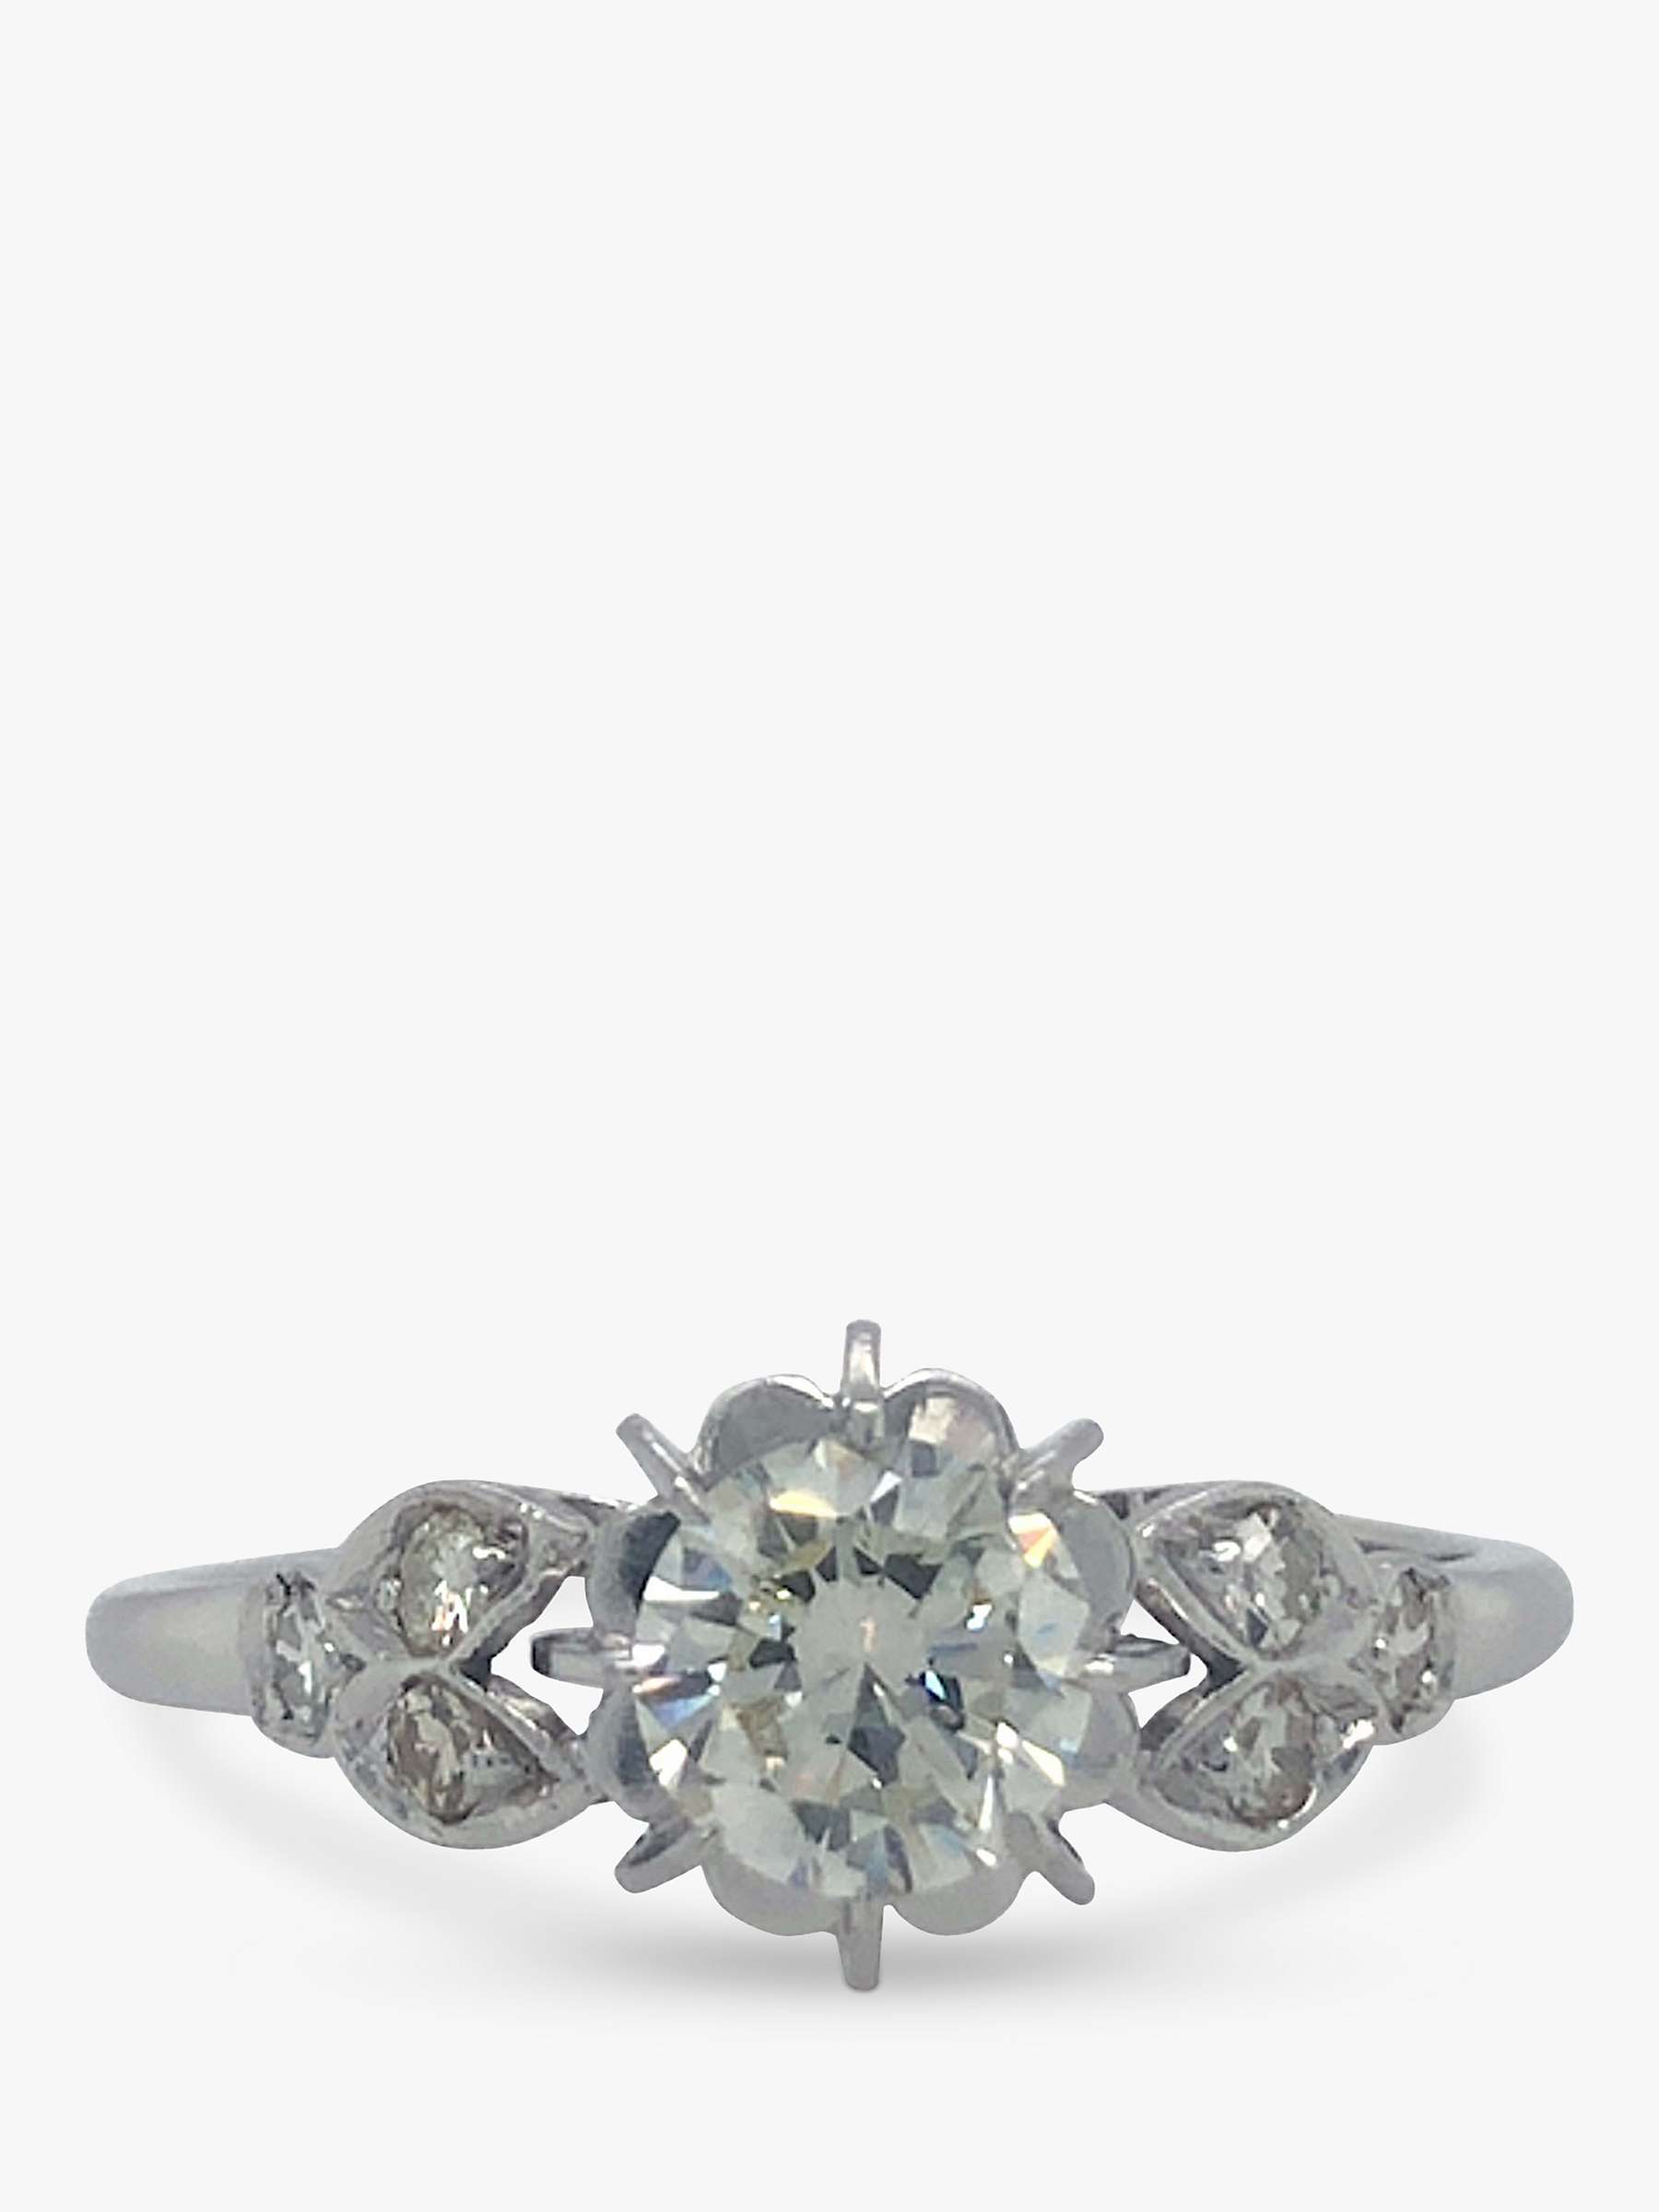 Buy Vintage Fine Jewellery Second Hand 18ct White Gold Brilliant Cut Diamond Cluster Ring Online at johnlewis.com